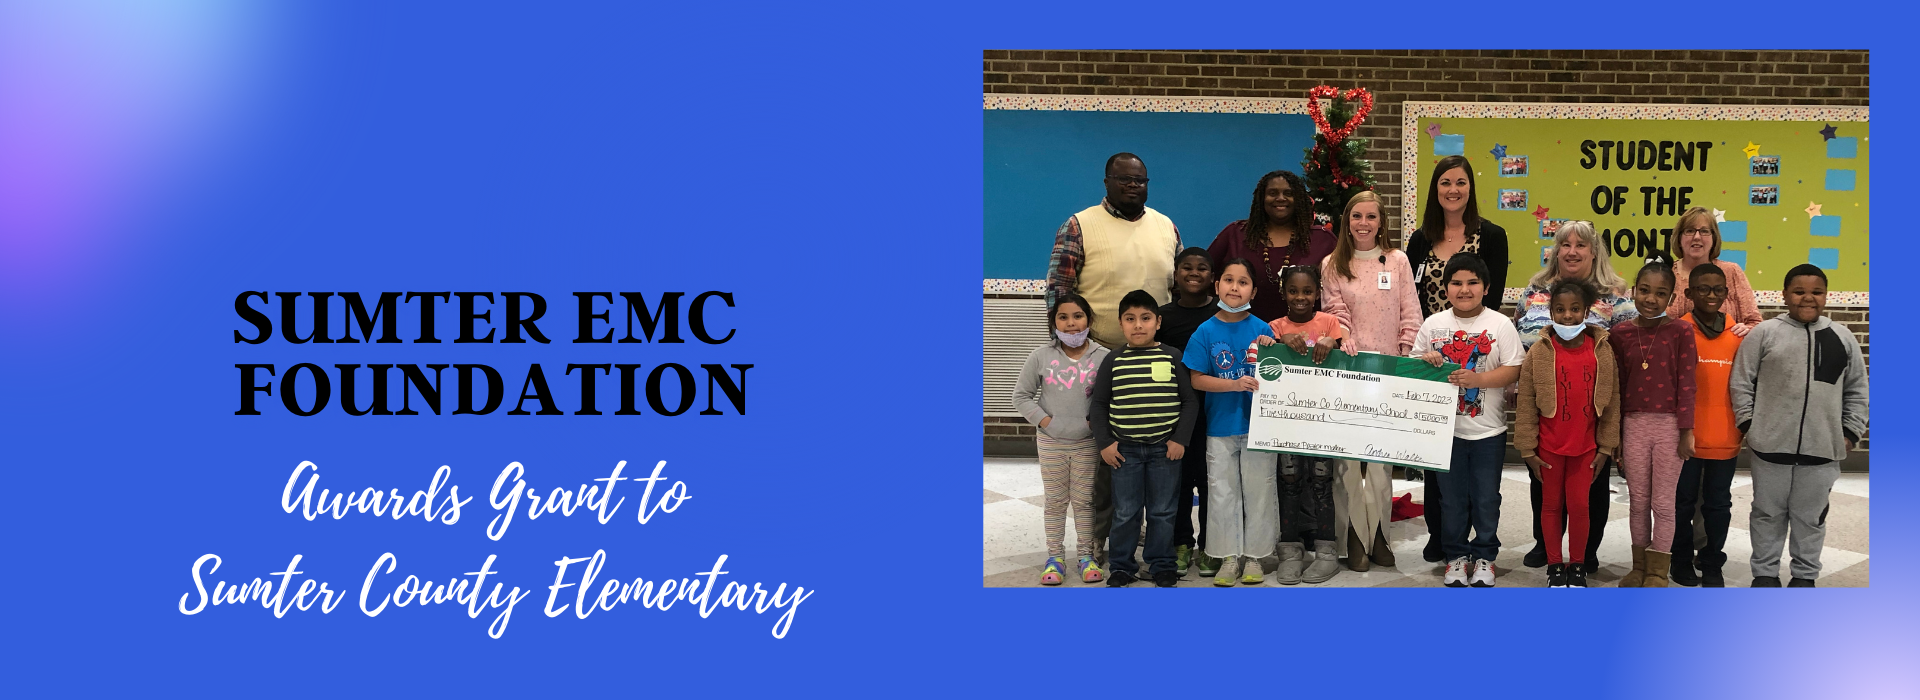 Sumter EMC Foundation Awards Grant to Sumter County Elementary